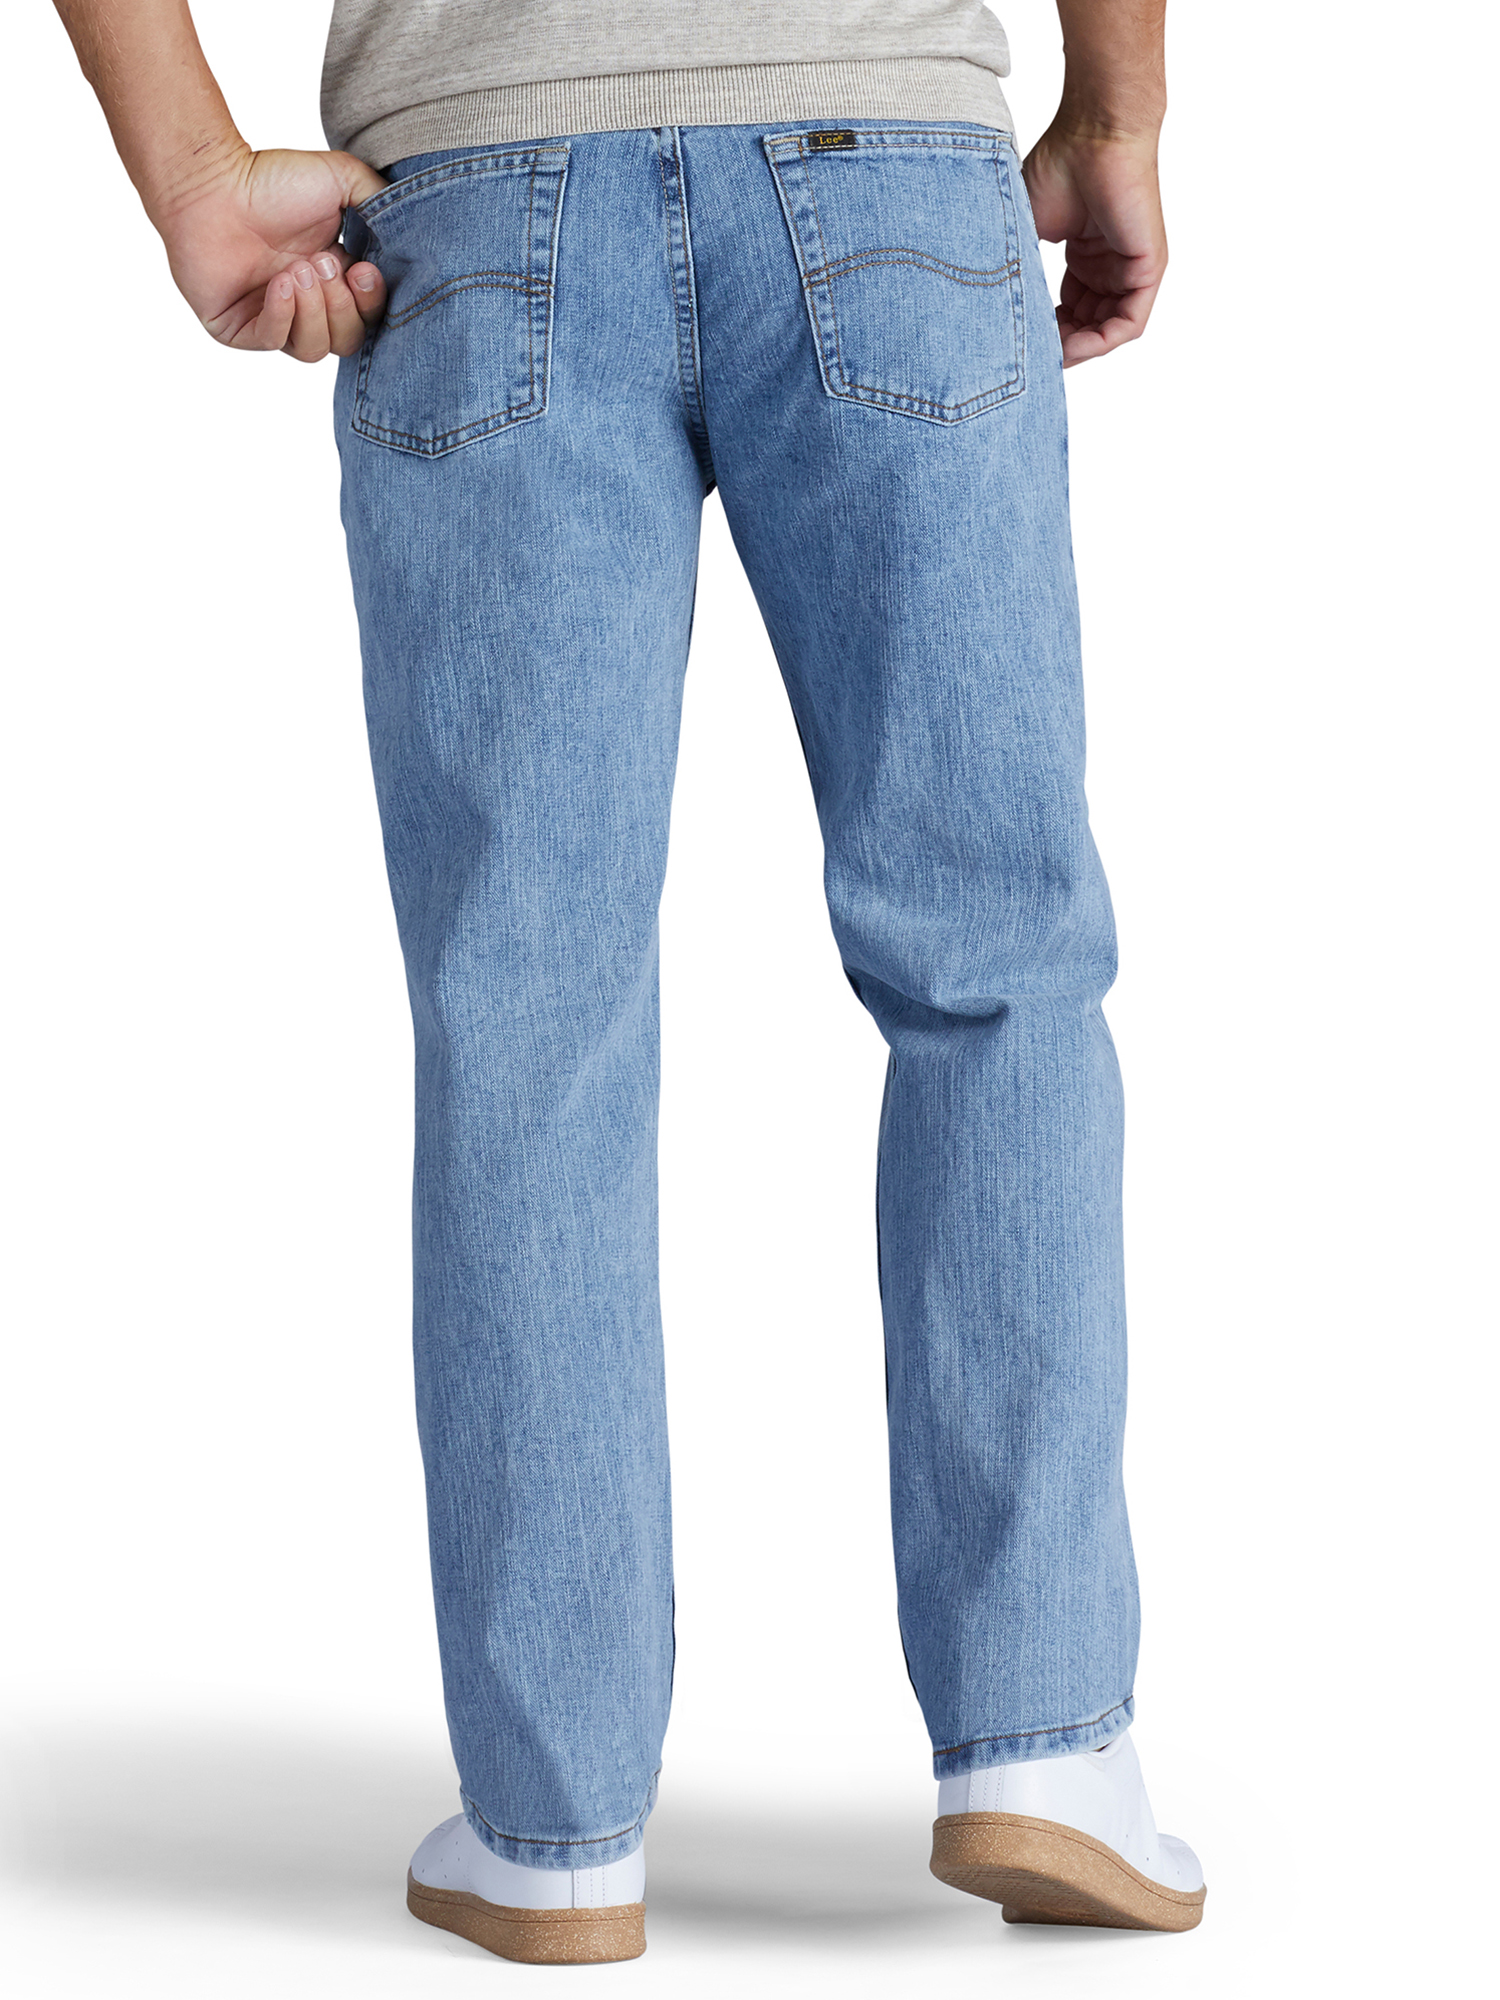 Lee Men's Relaxed Fit Straight Leg Jeans - image 5 of 5